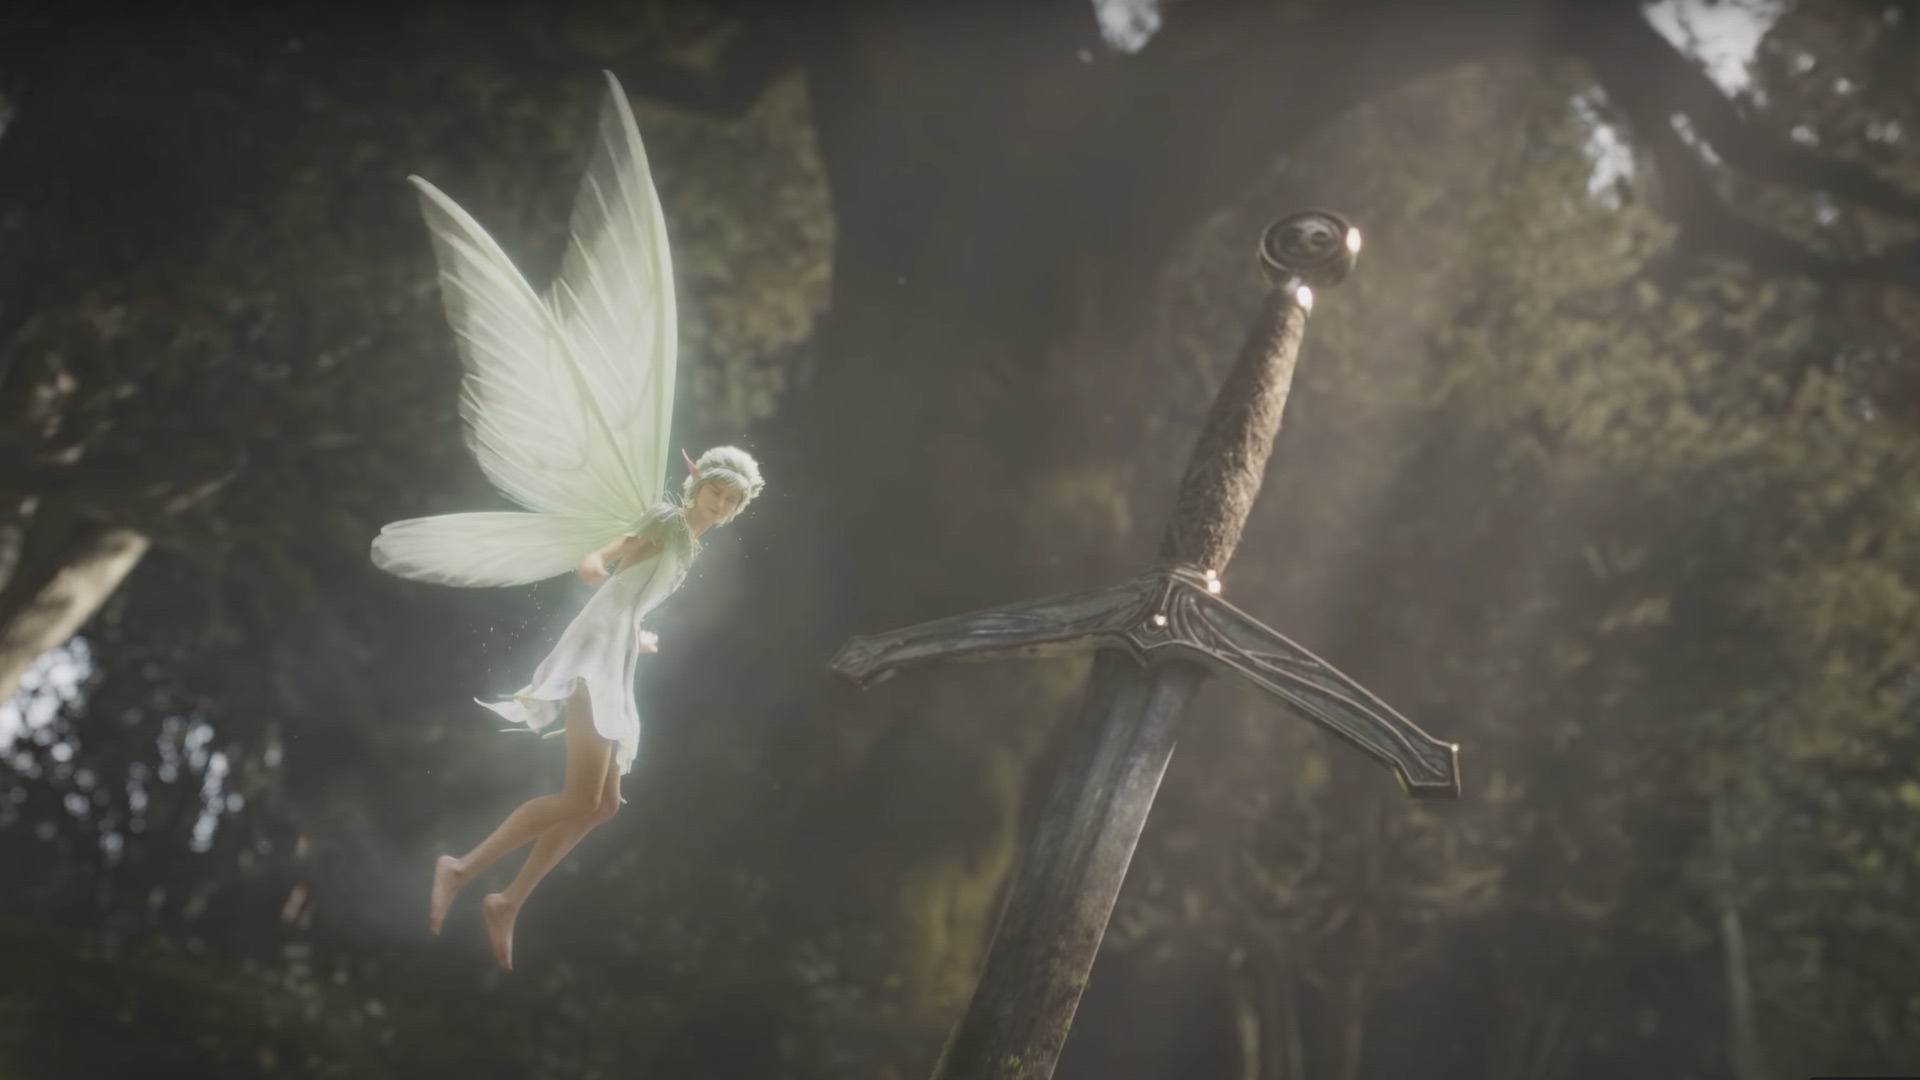 A flying fairy next to a sword hilt